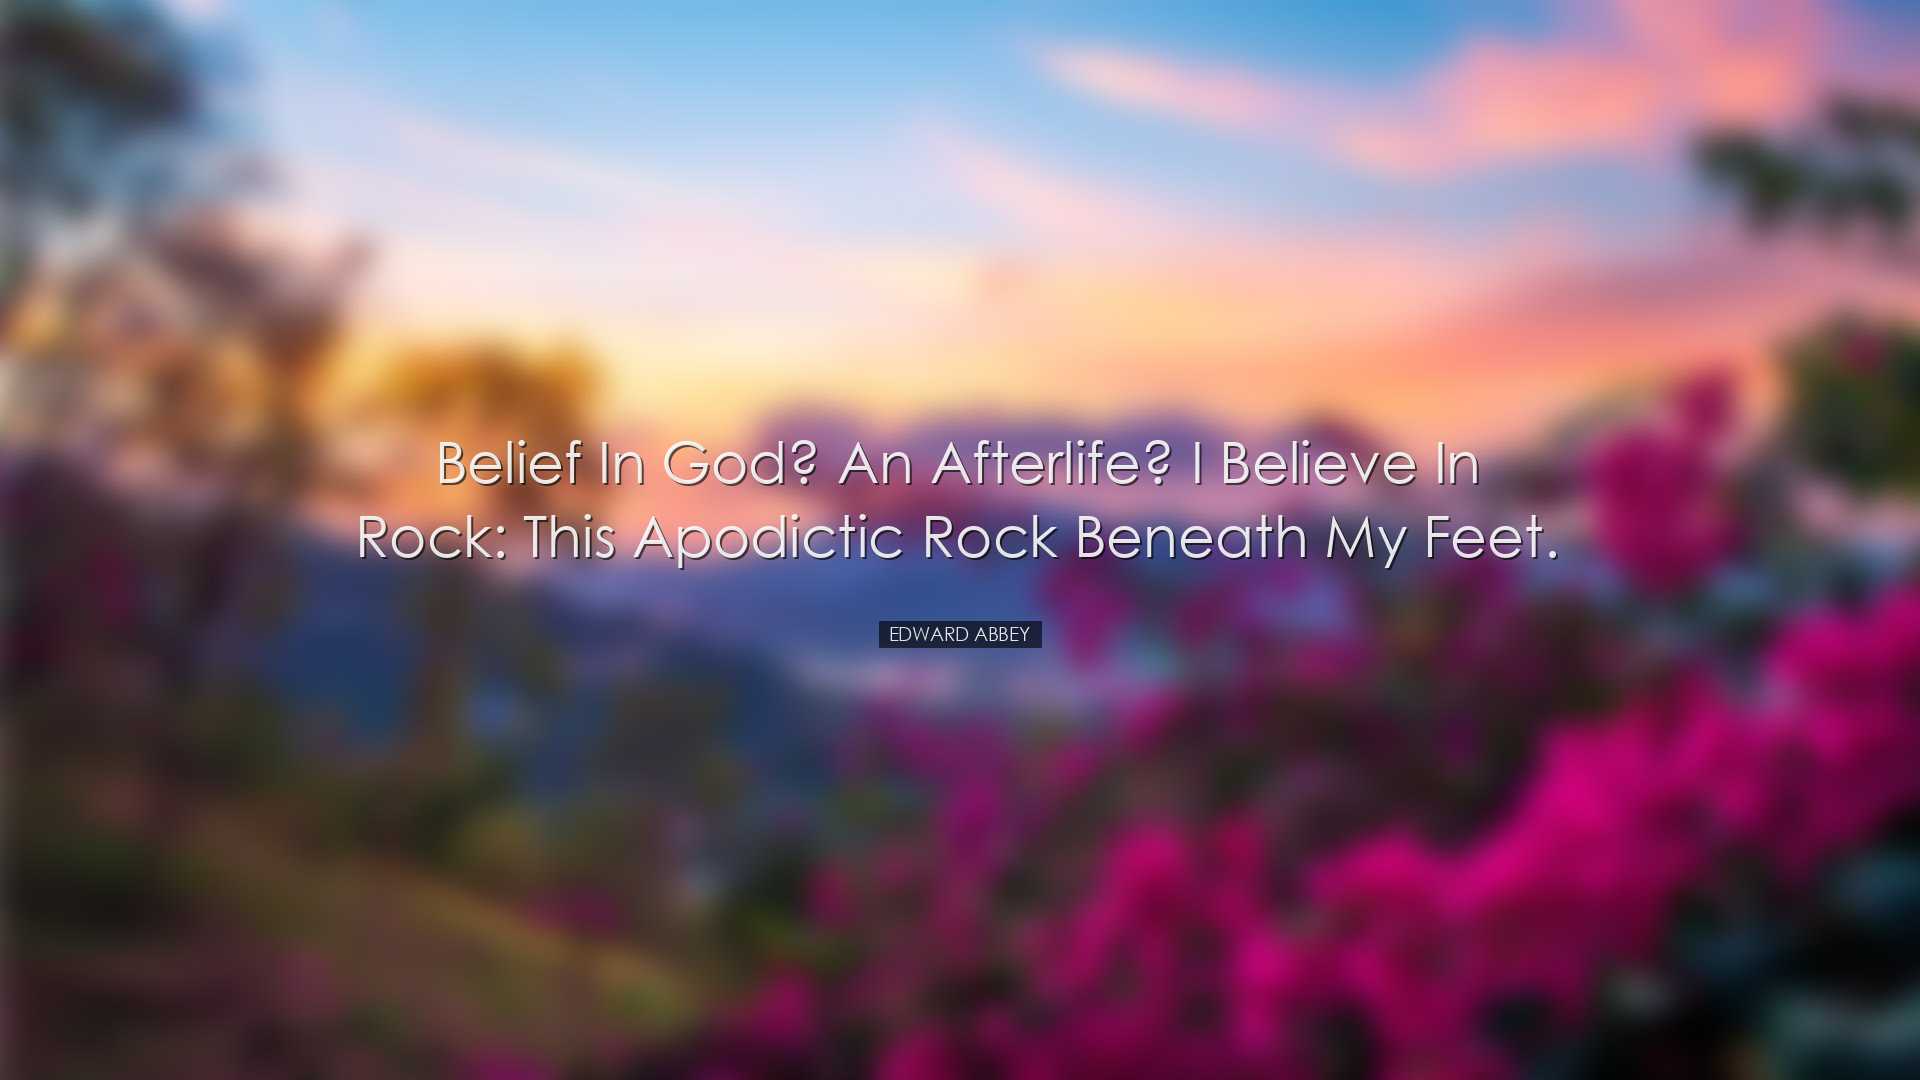 Belief in God? An afterlife? I believe in rock: this apodictic roc